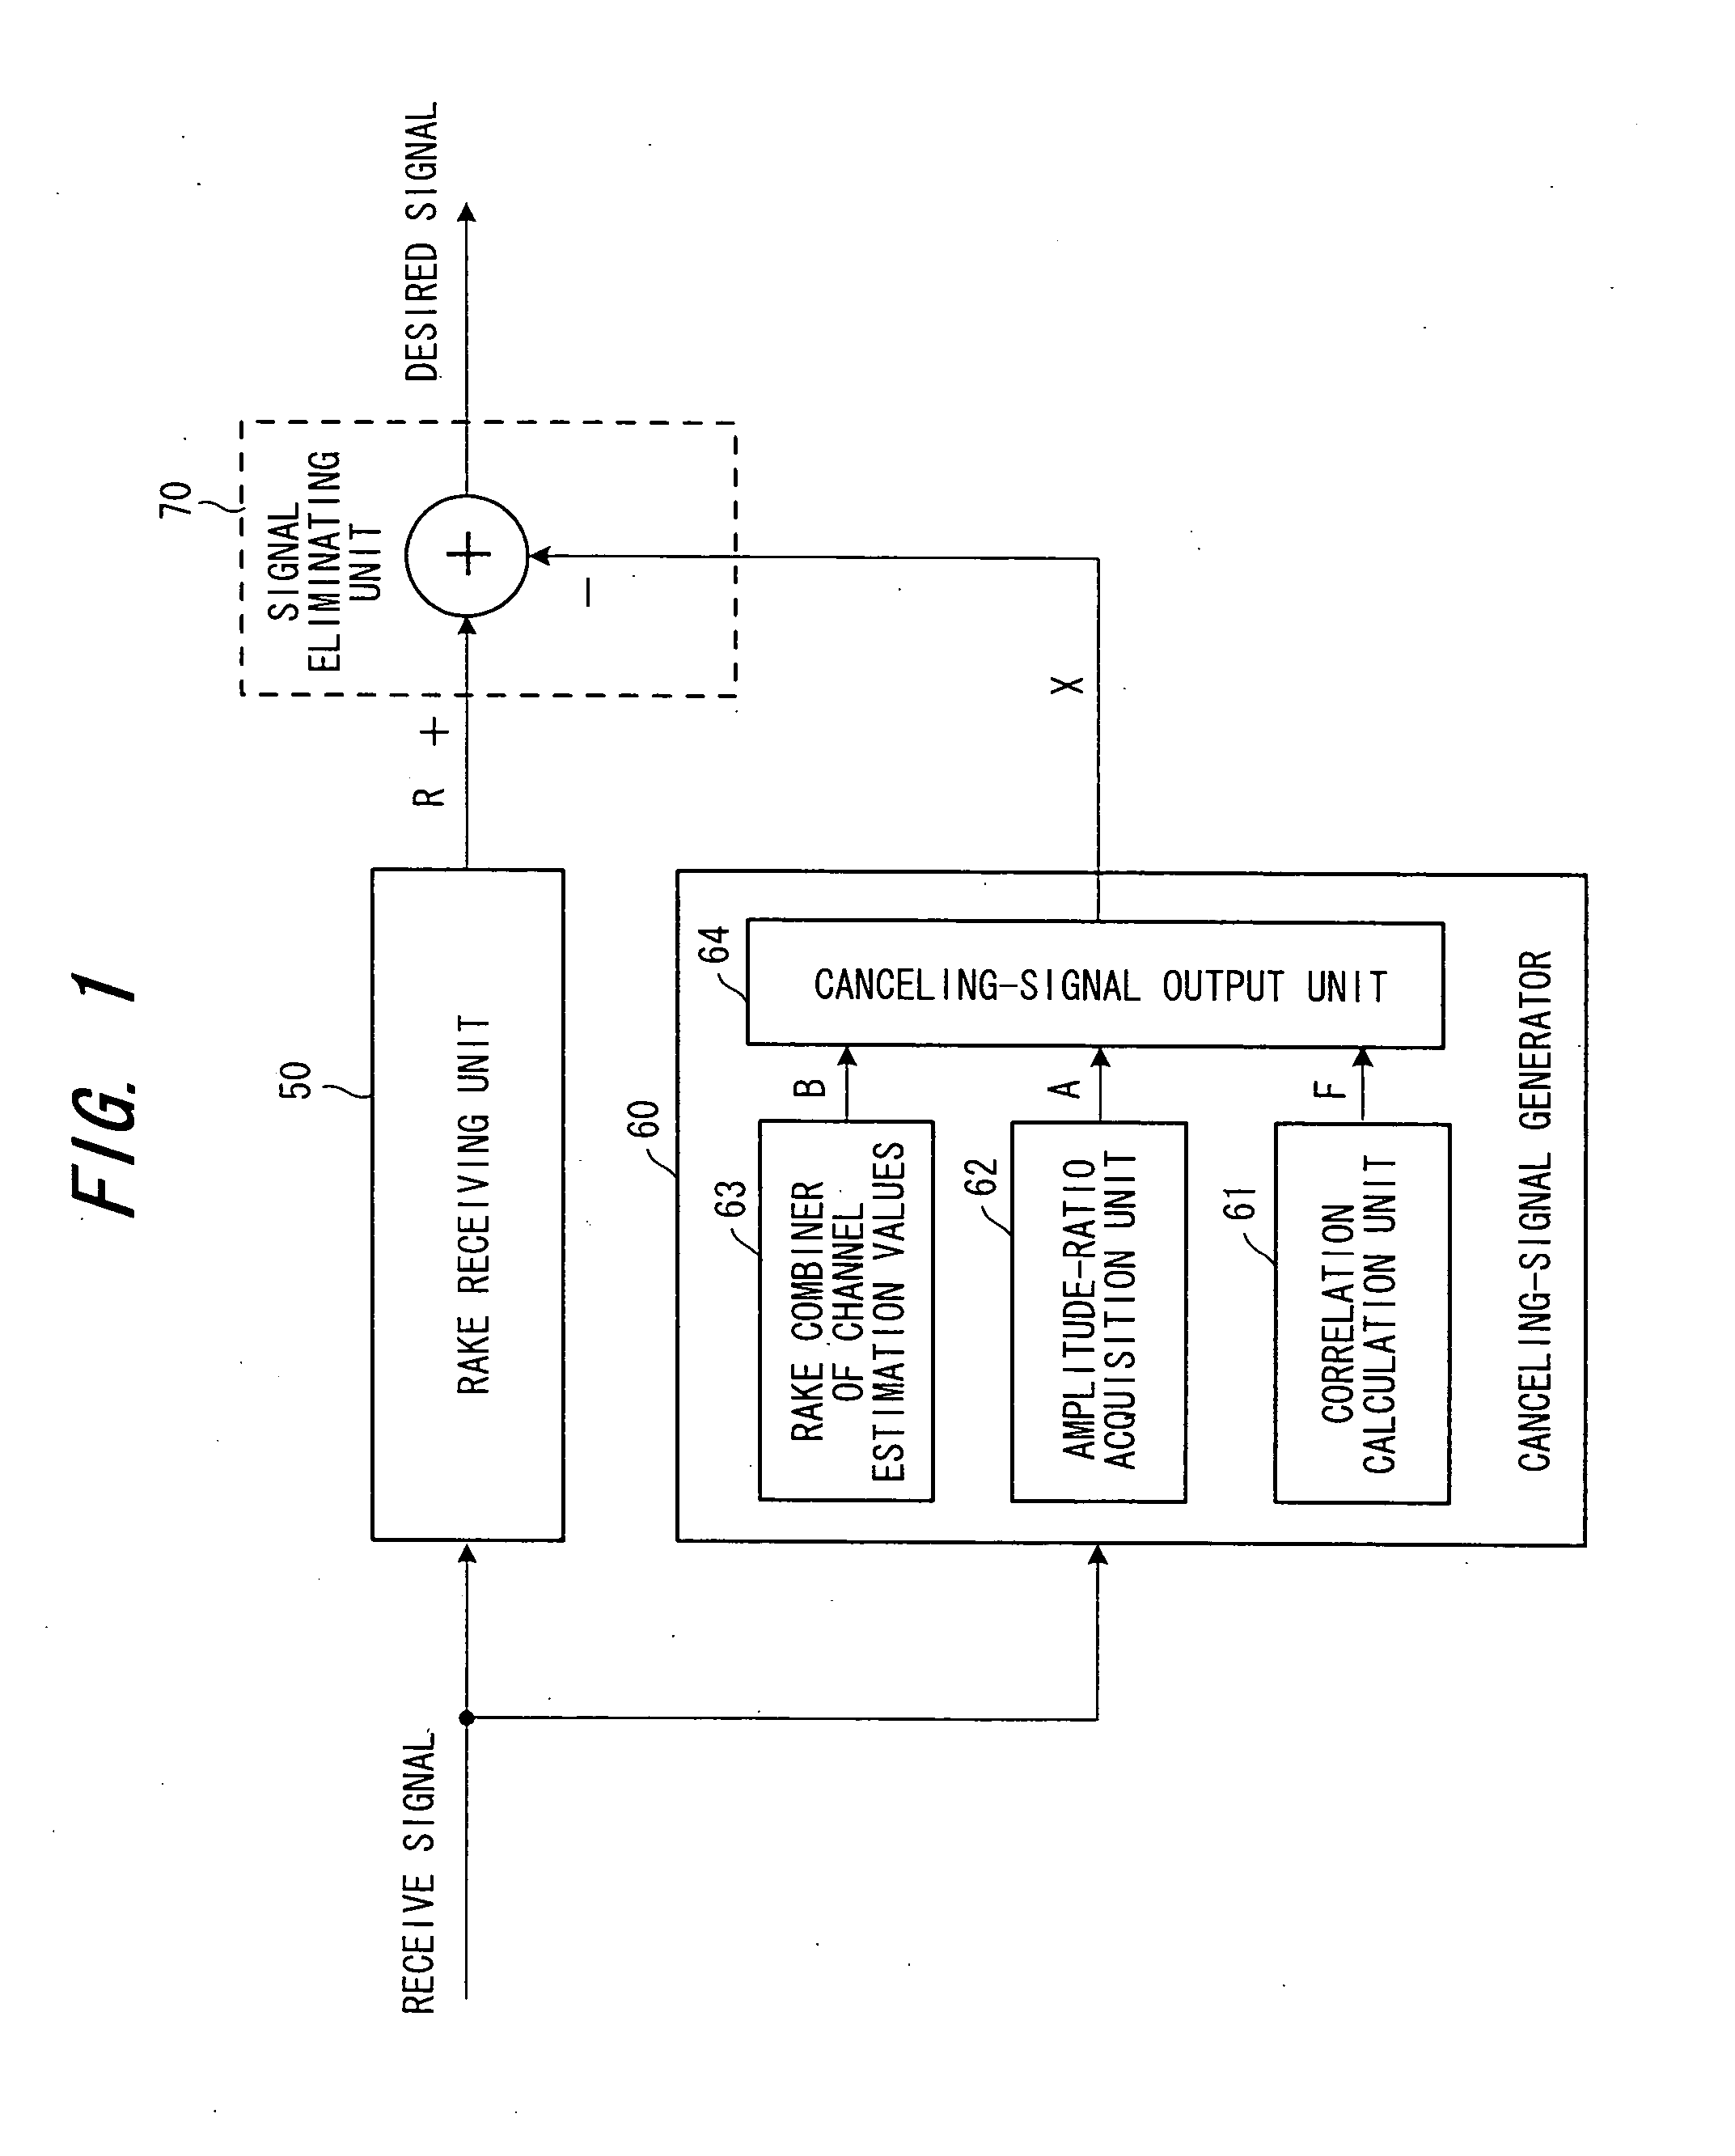 Interference eliminating apparatus and method